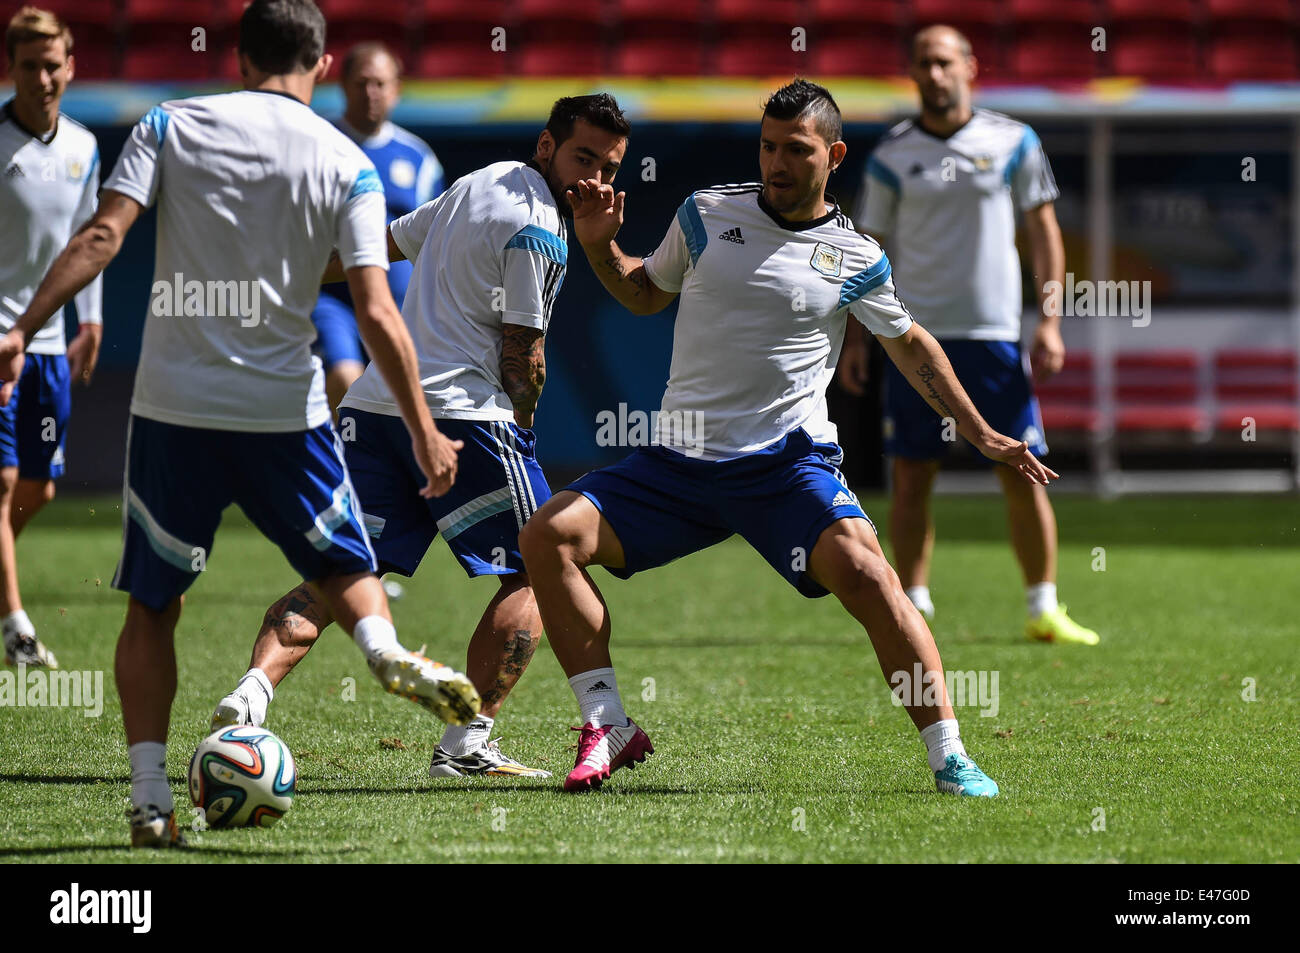 Brasilia. 4th July, 2014. Argentina's Sergio Aguero (2nd R) competes during a training session in Brasilia, Brazil, on July 4, 2014, ahead of a quarter-finals match between Argentina and Belgium of 2014 FIFA World Cup. Credit:  Liu Dawei/Xinhua/Alamy Live News Stock Photo